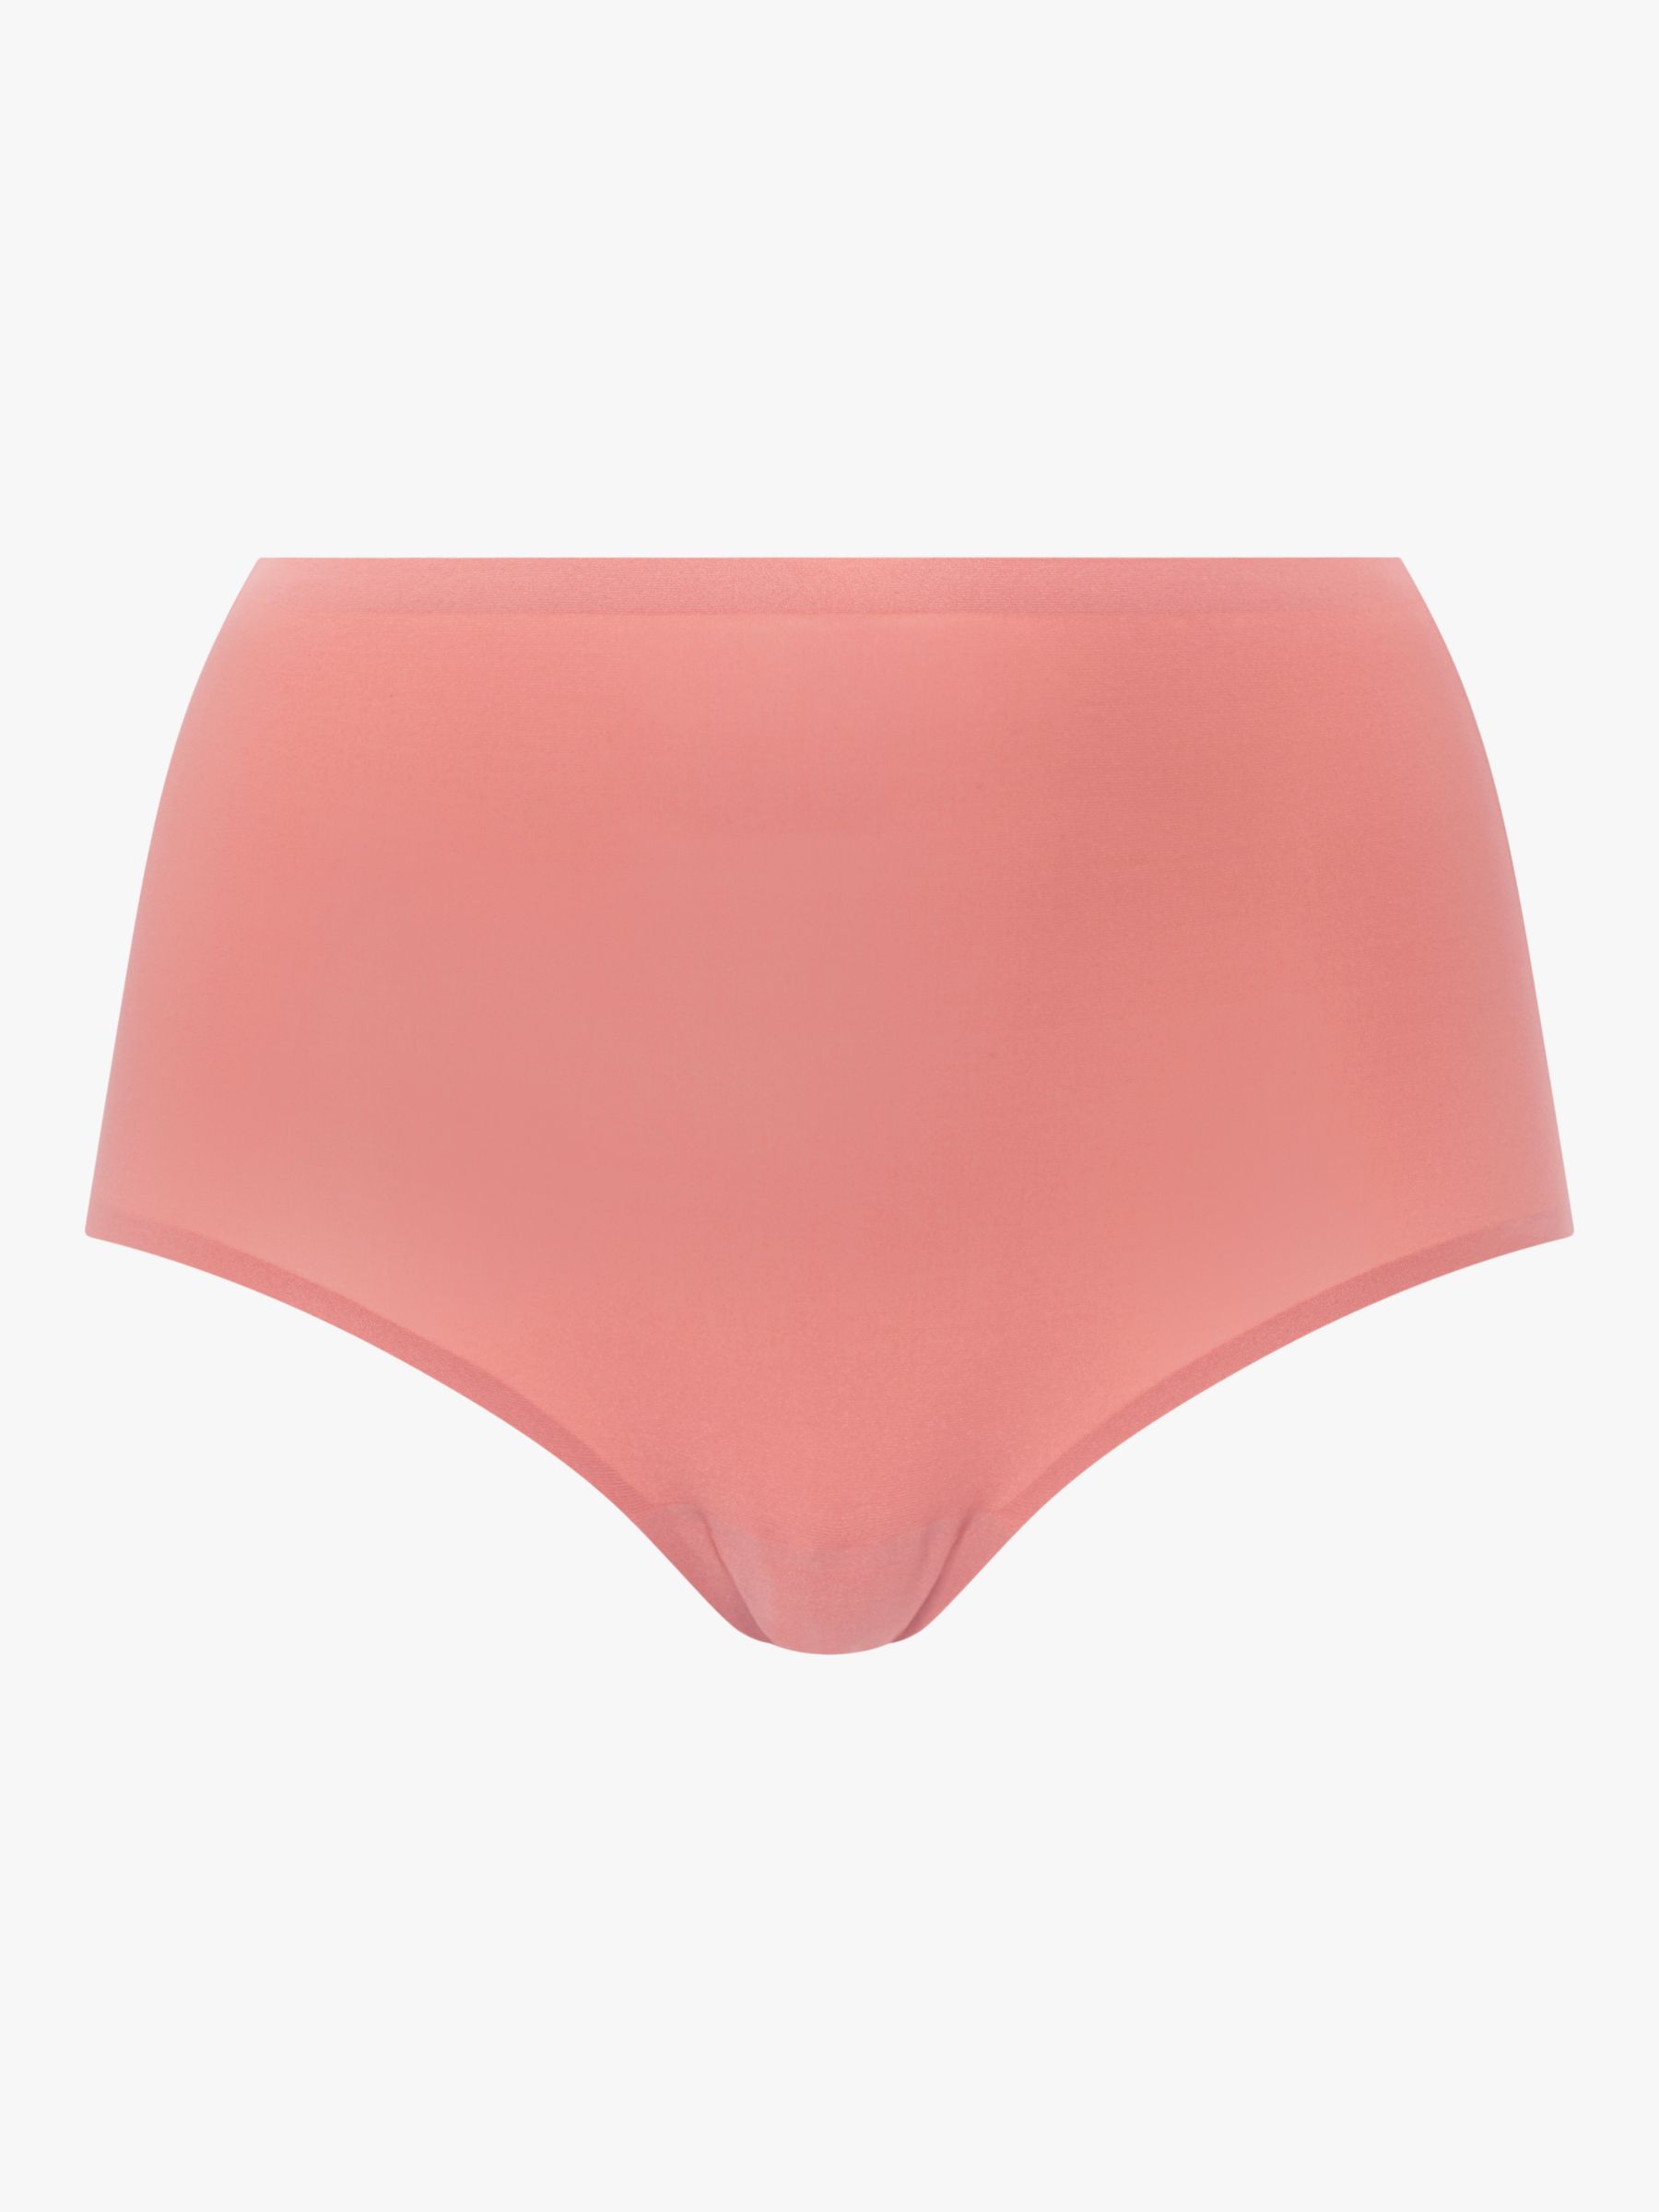 Chantelle Soft Stretch High Waisted Knickers, Peach Delight at